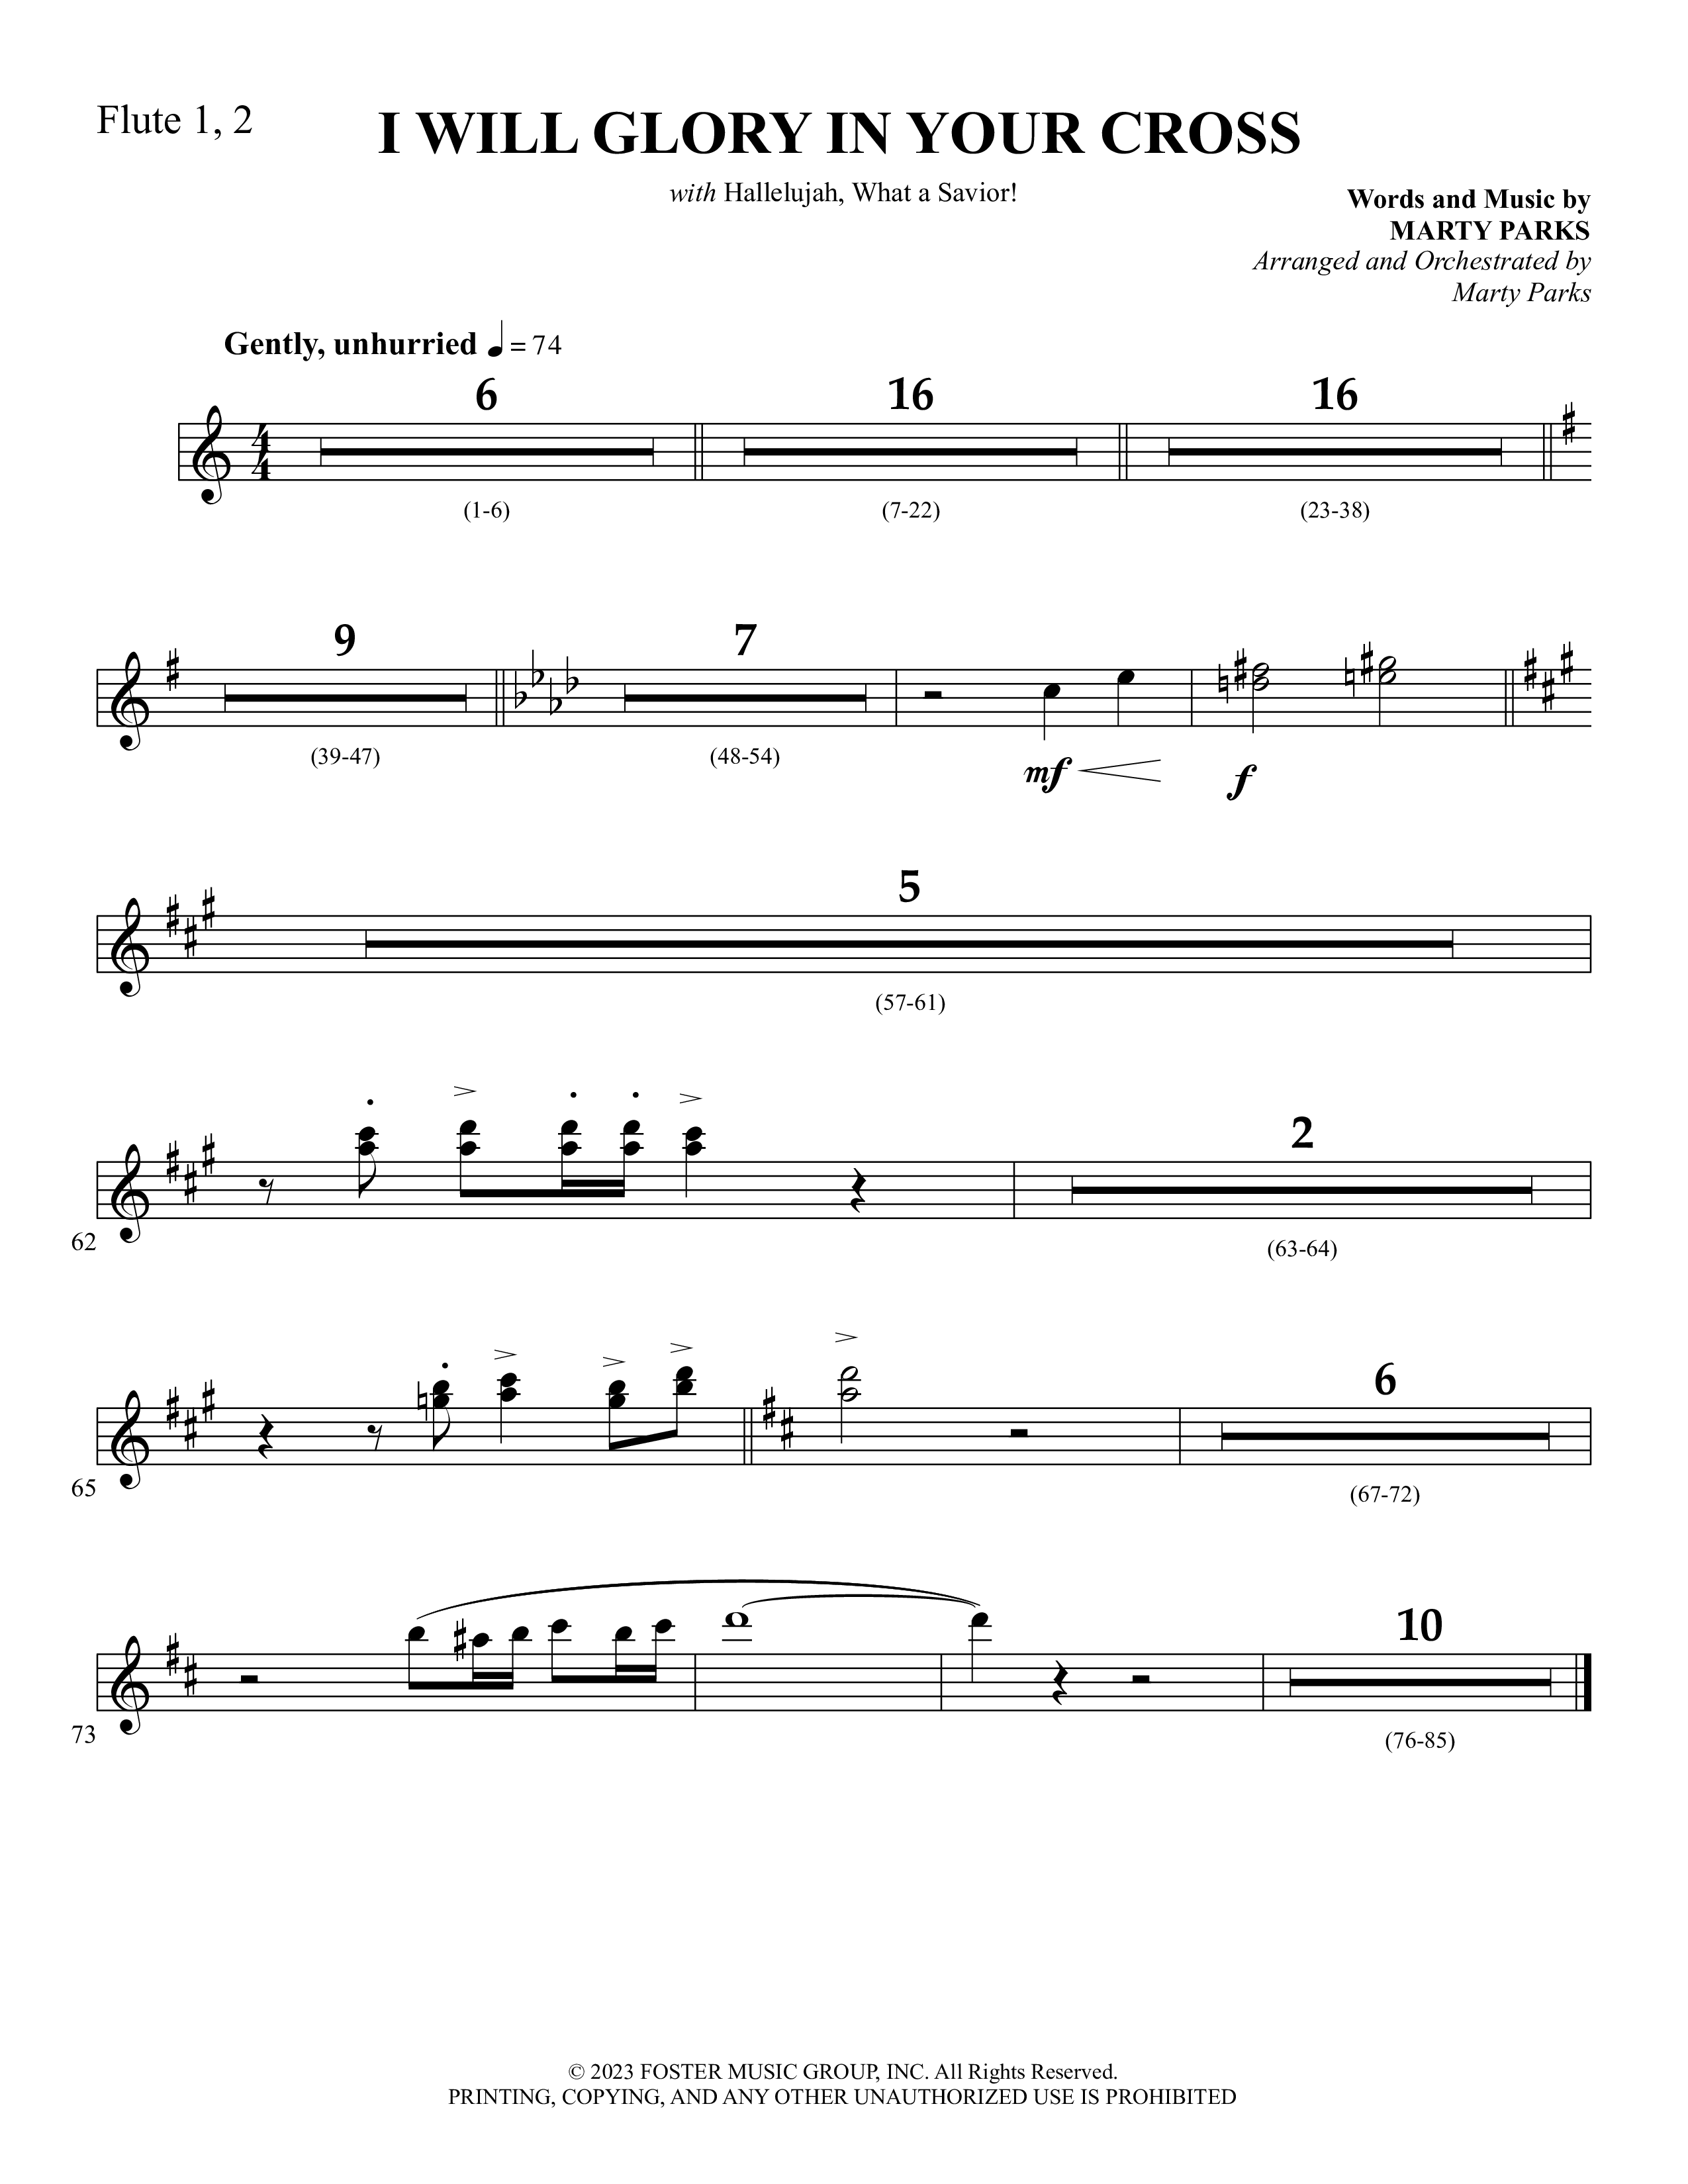 I Will Glory In Your Cross (with Hallelujah What A Savior) Flute 1/2 (Foster Music Group / Arr. Marty Parks)